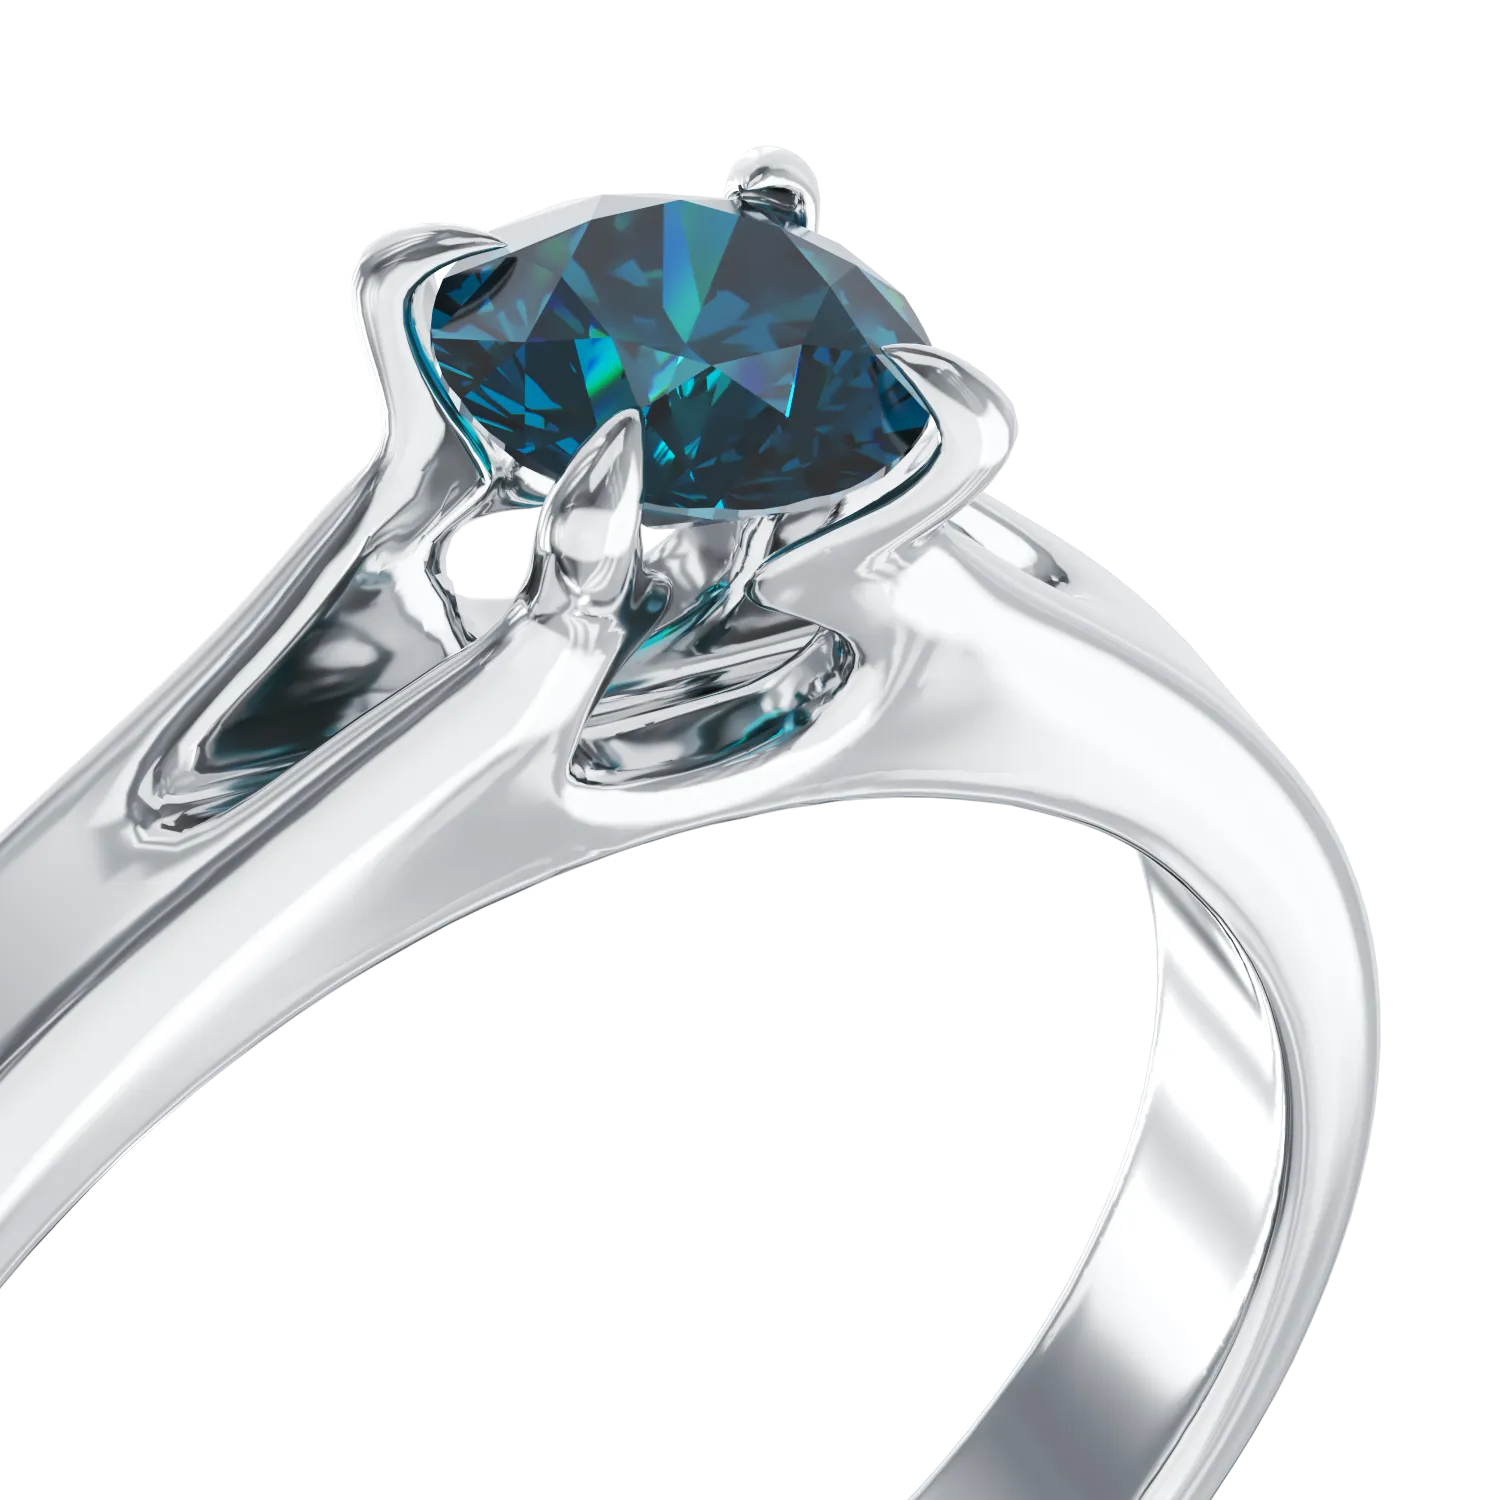 18K white gold engagement ring with a 0.44ct blue solitaire diamond